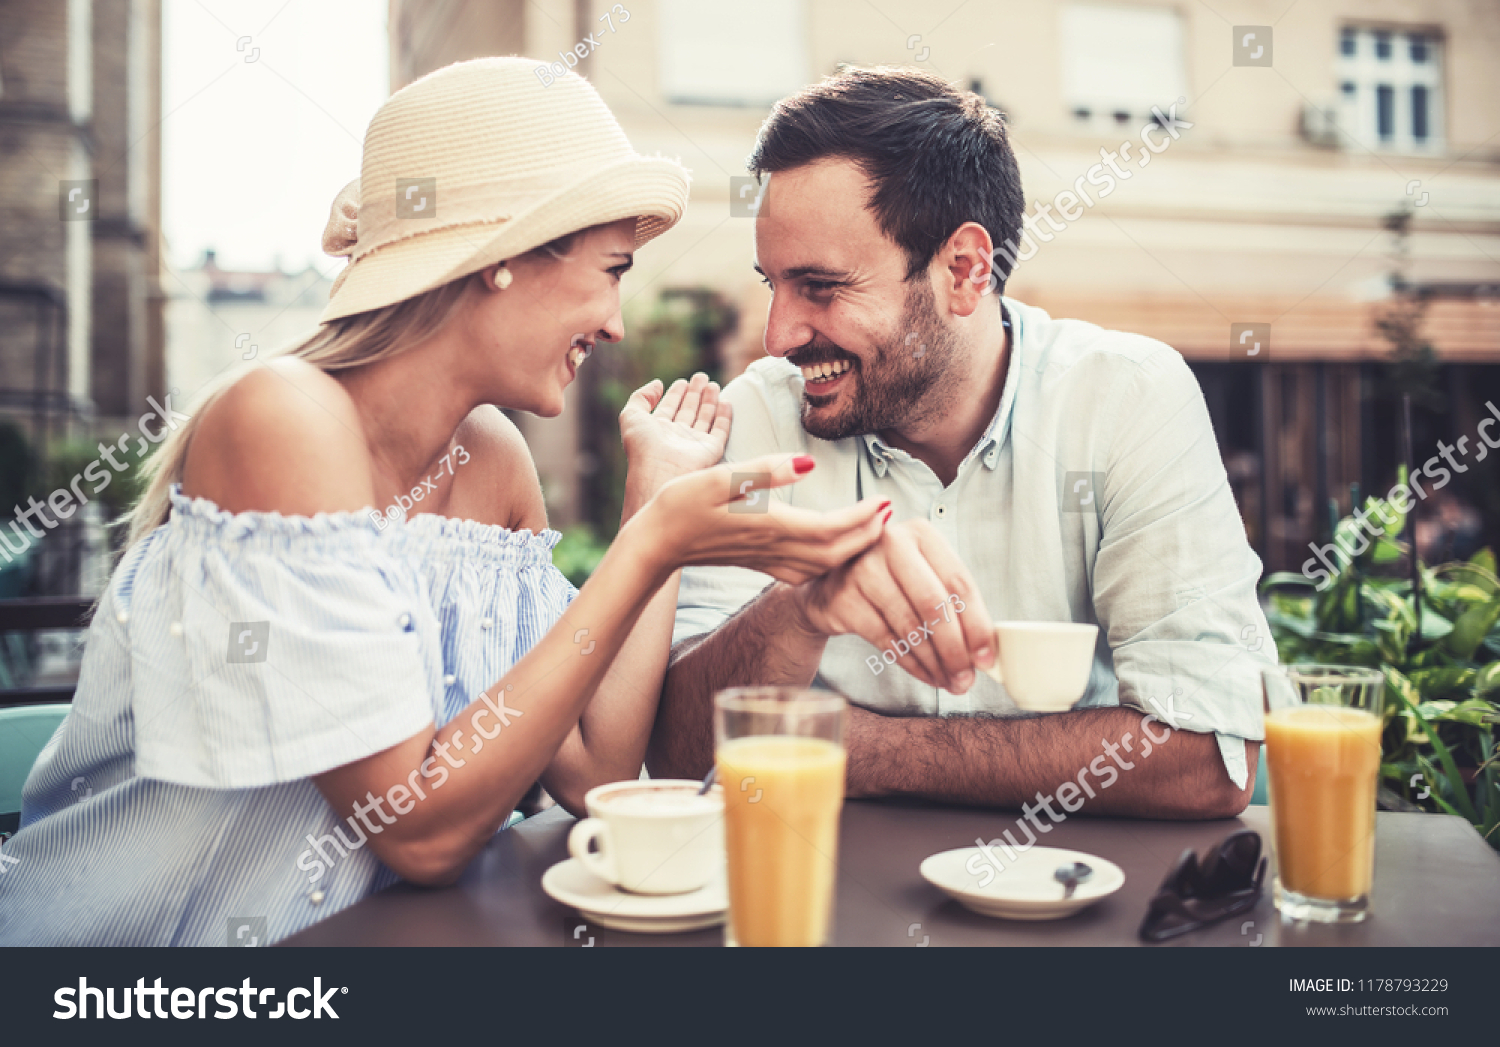 Flirting in a cafe. Beautiful loving couple sitting in a cafe drinking coffee and enjoying in conversation. Love, romance, dating #1178793229